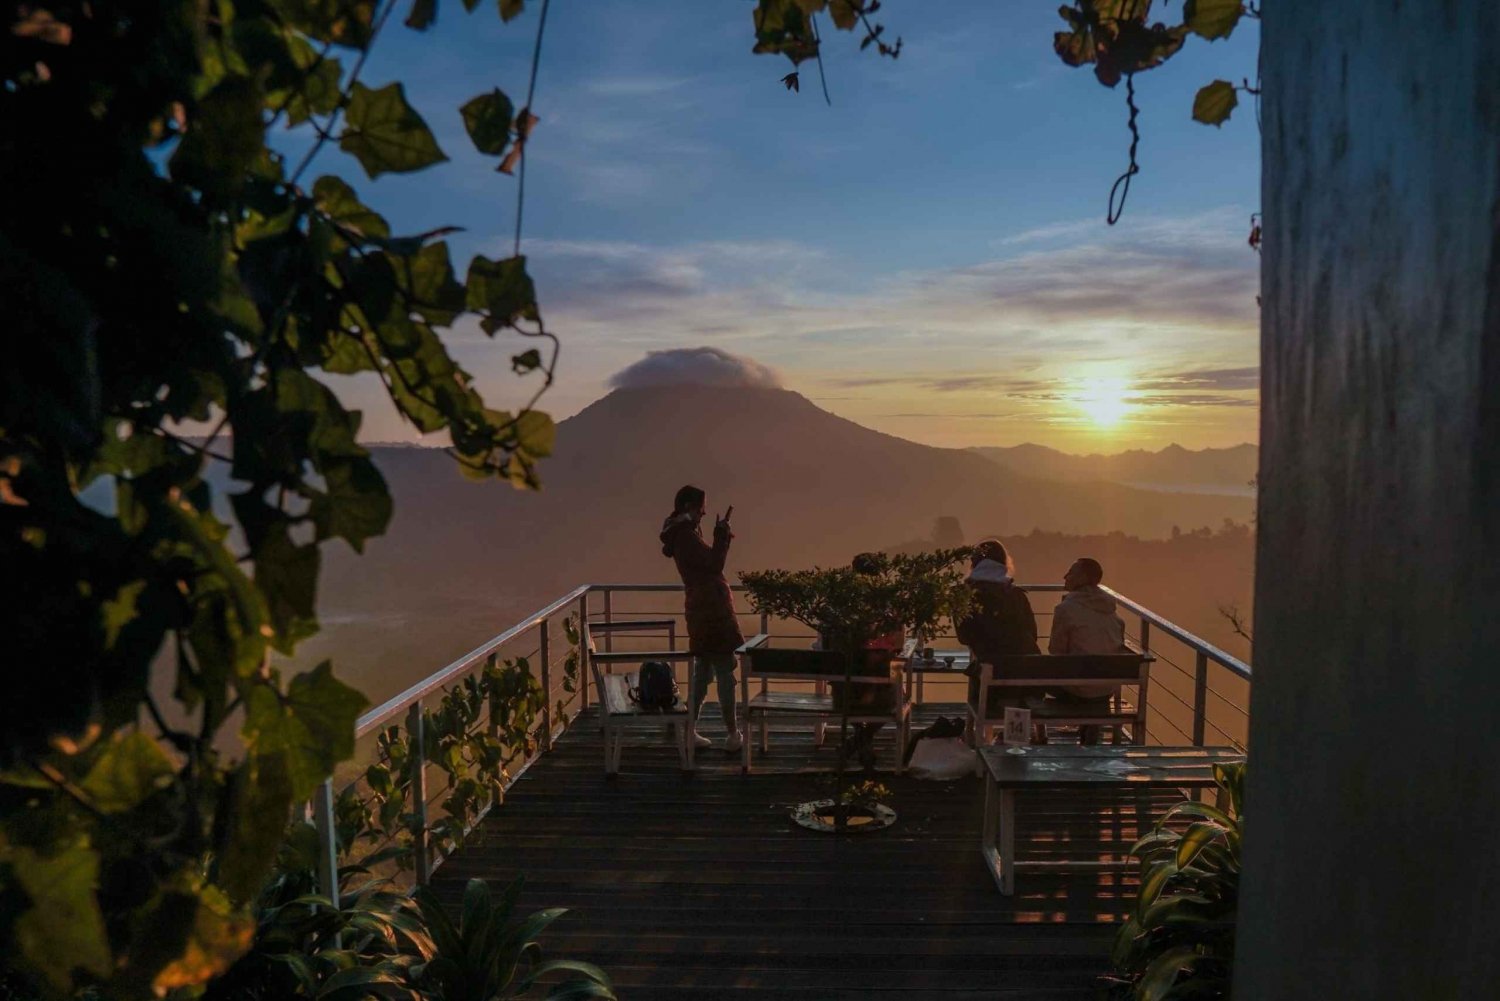 Bali: Lifestyle, Discover the Most Photogenic Spots in Bali